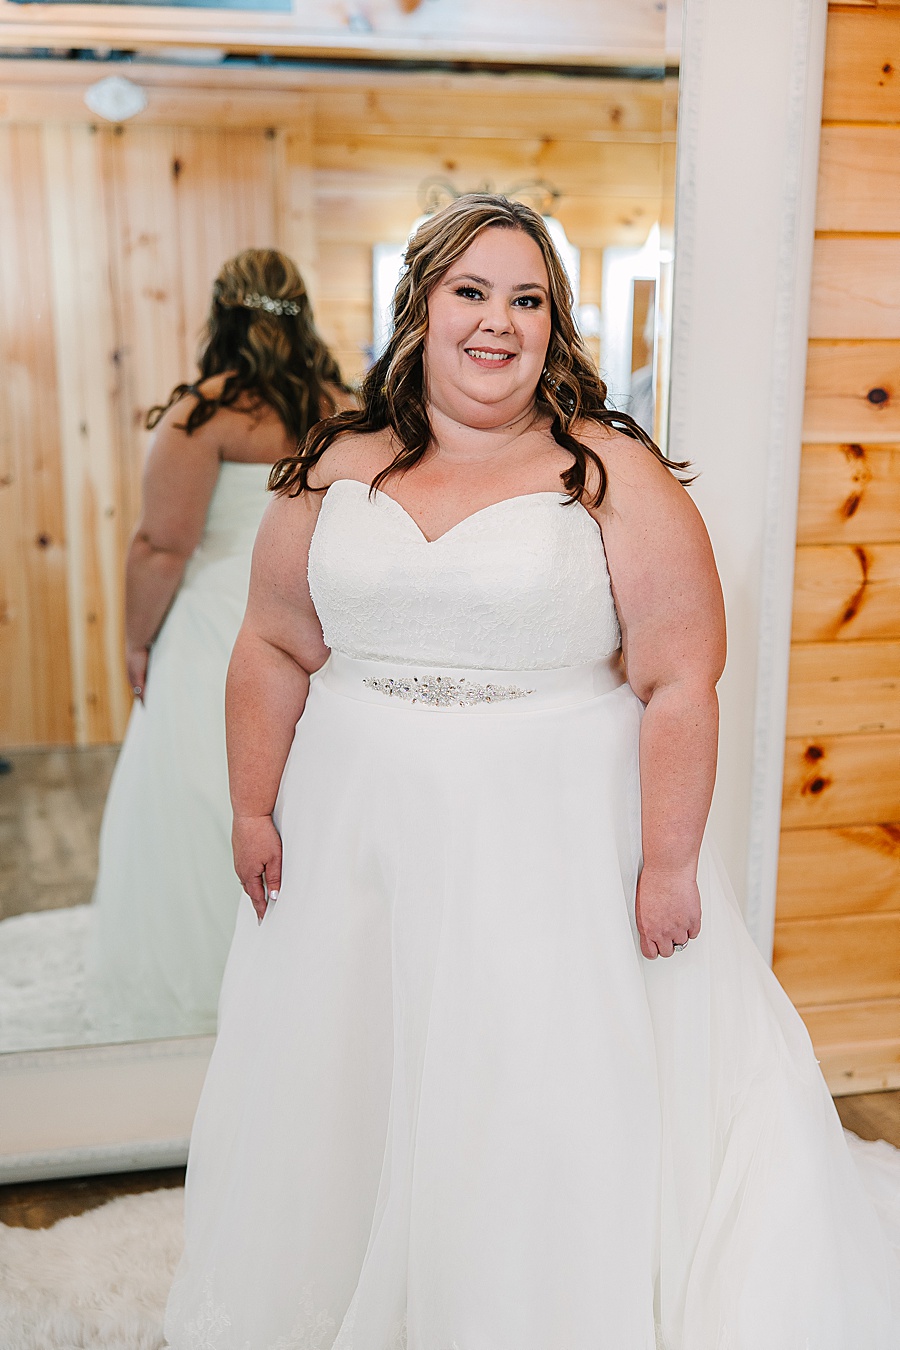 Bride in wedding dress at Venue at Greenbrier Estate by Mandy Hart Photo Knoxville Wedding photographer